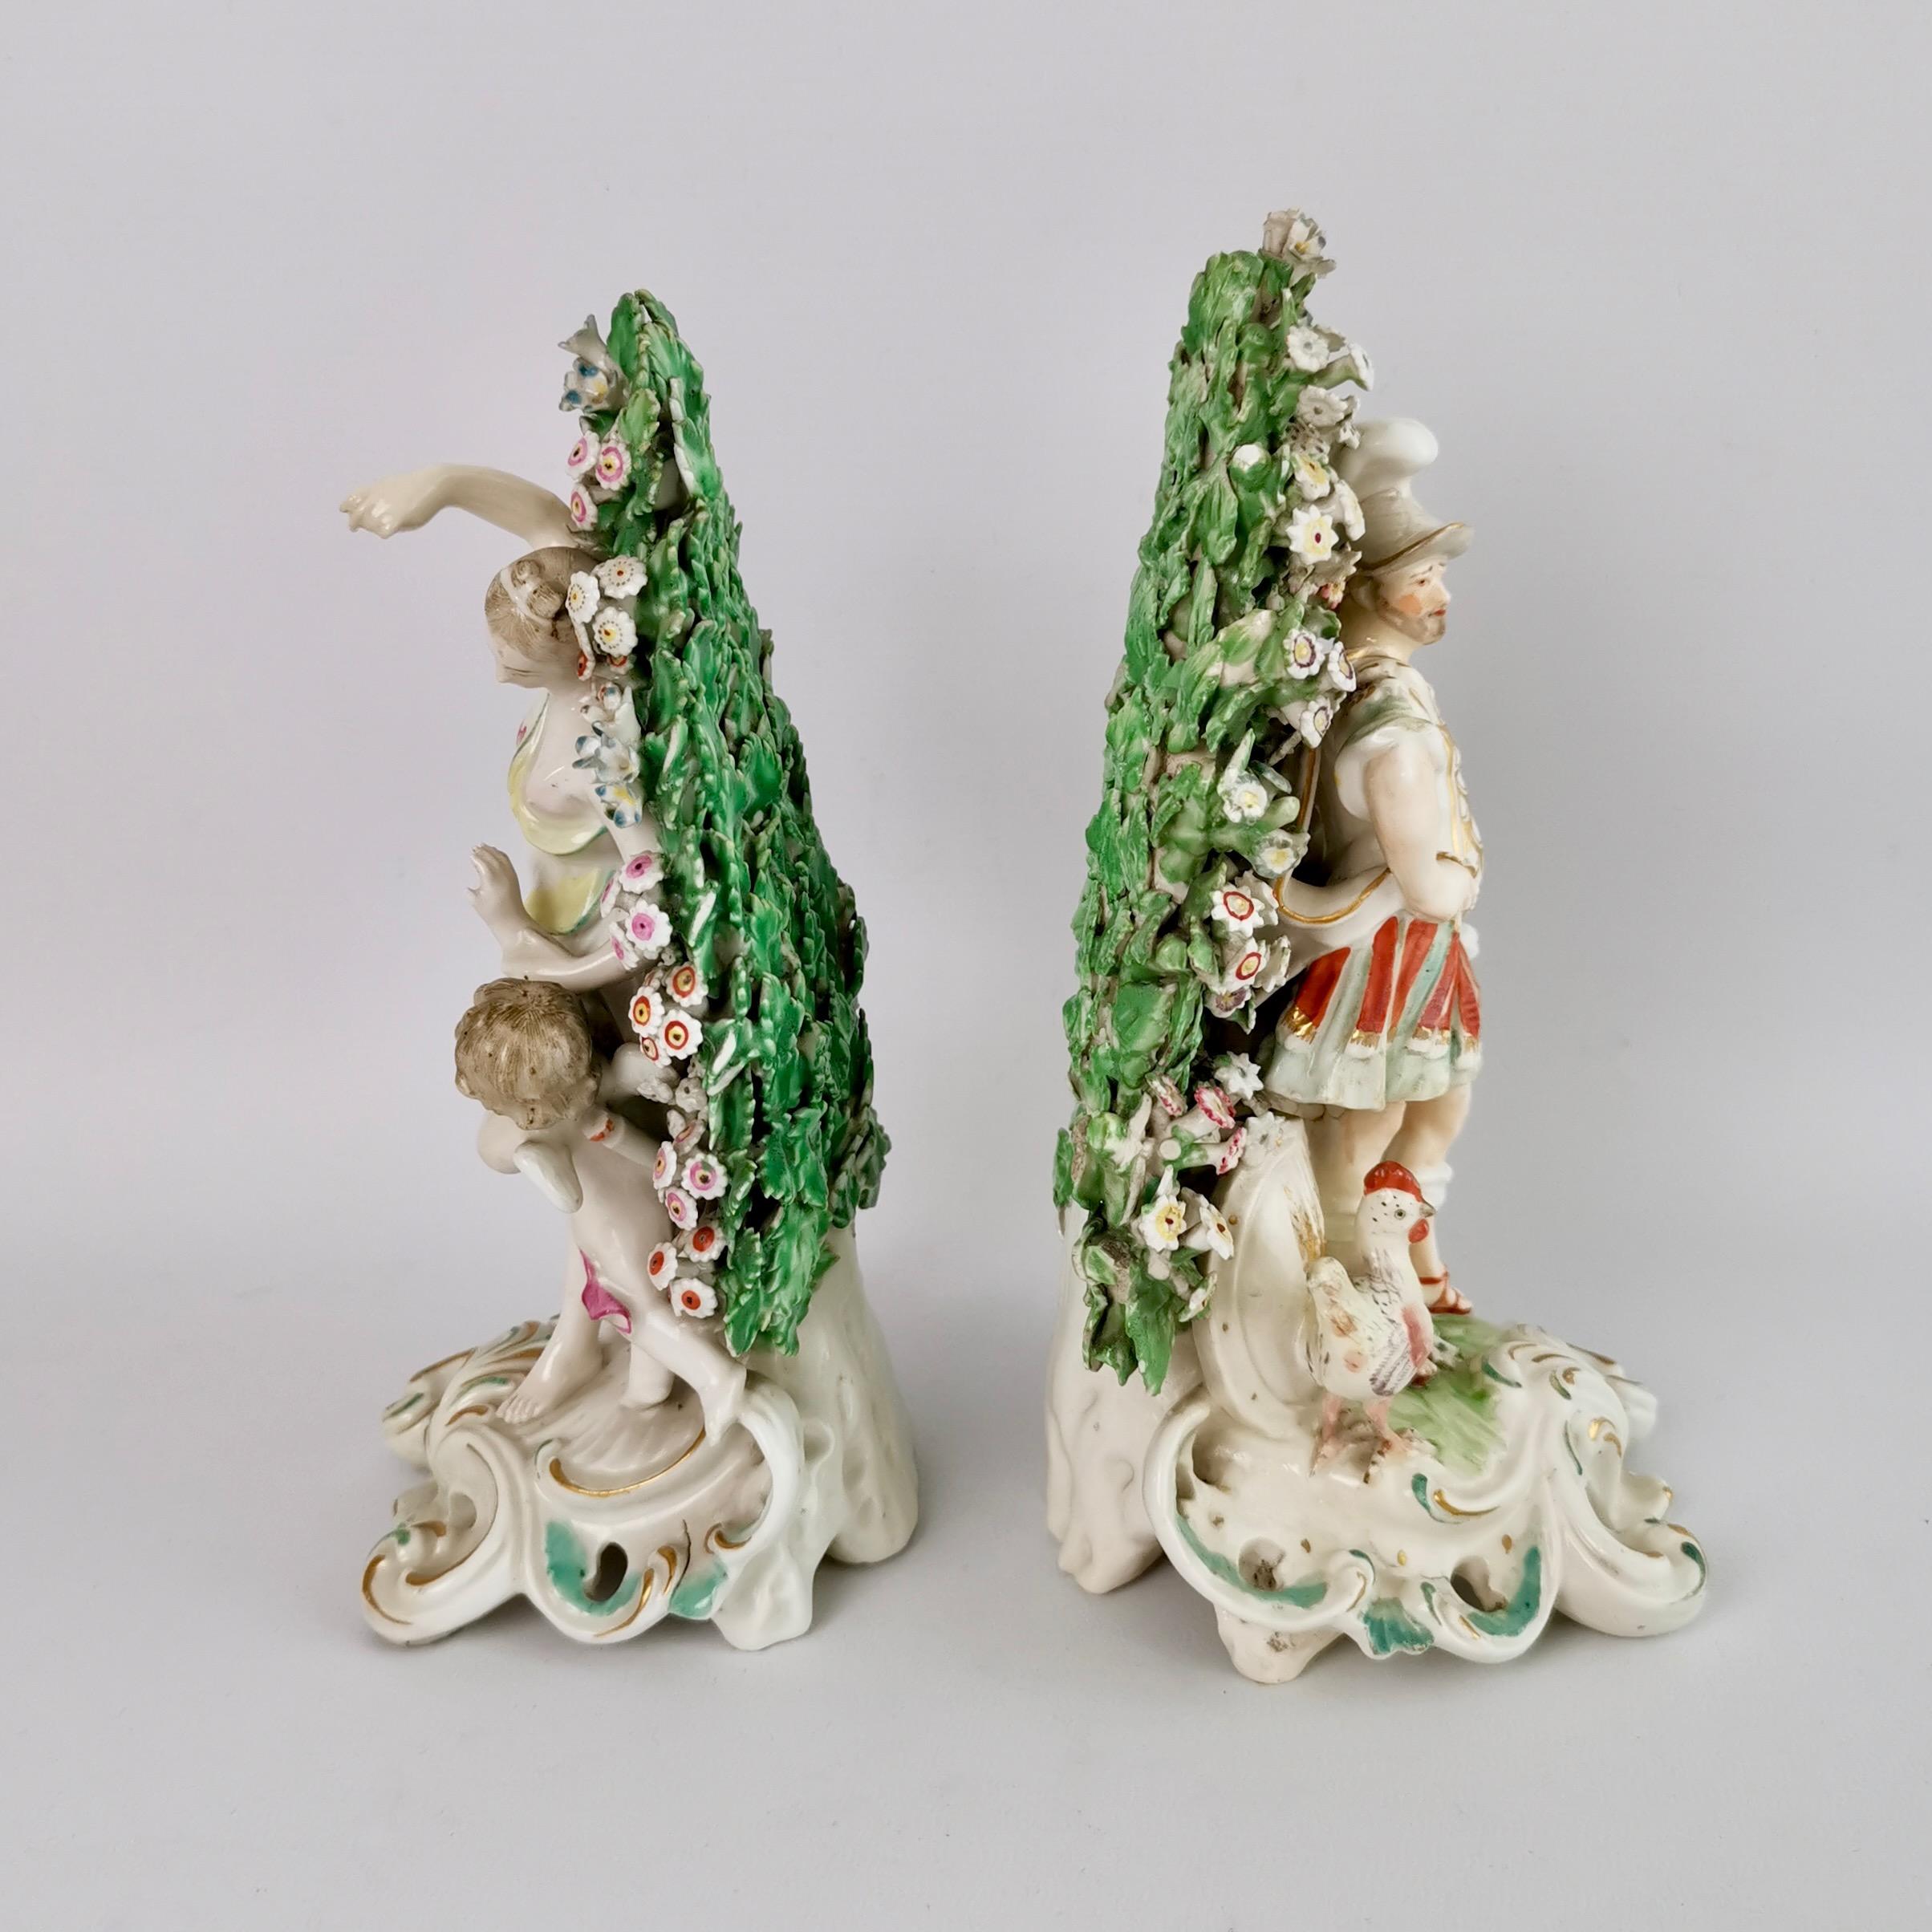 Hand-Painted Pair of Derby Porcelain Figures of Mars and Venus, Rococo, 1759-1769